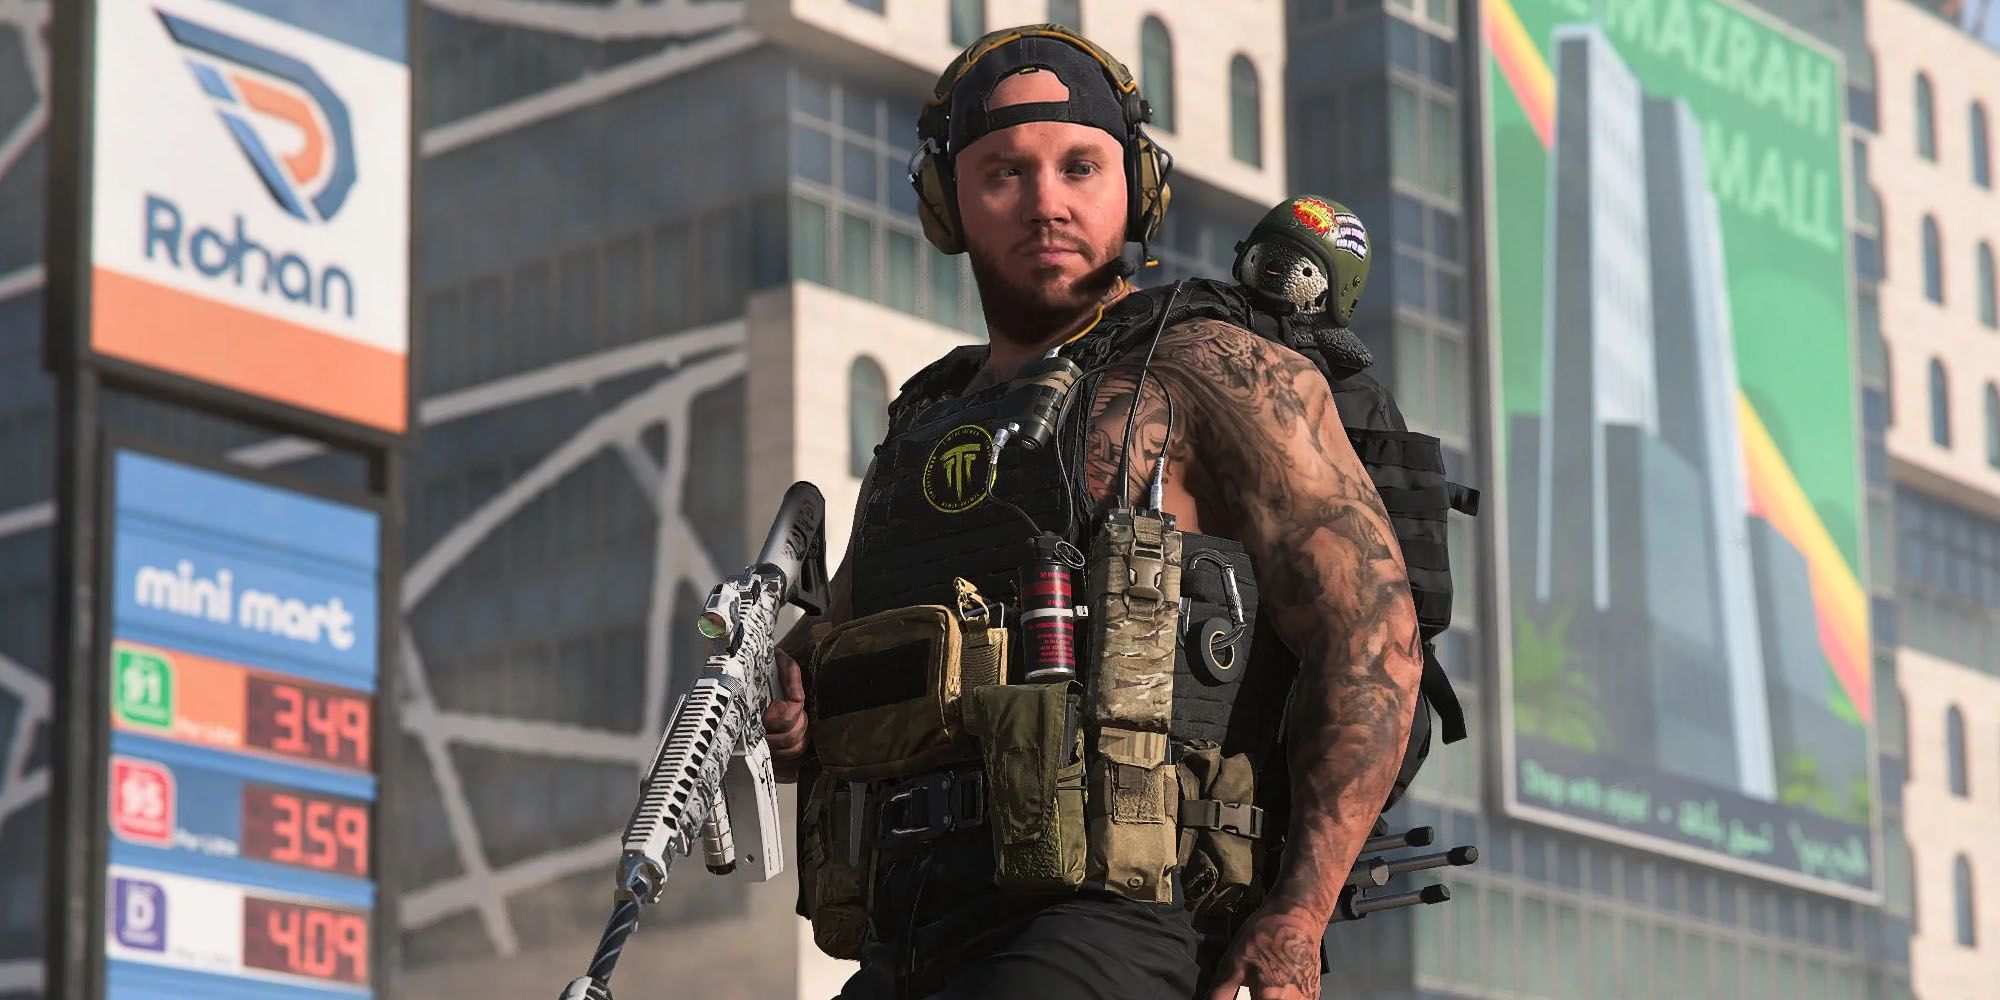 Call of Duty removes Operator bundles following streamers